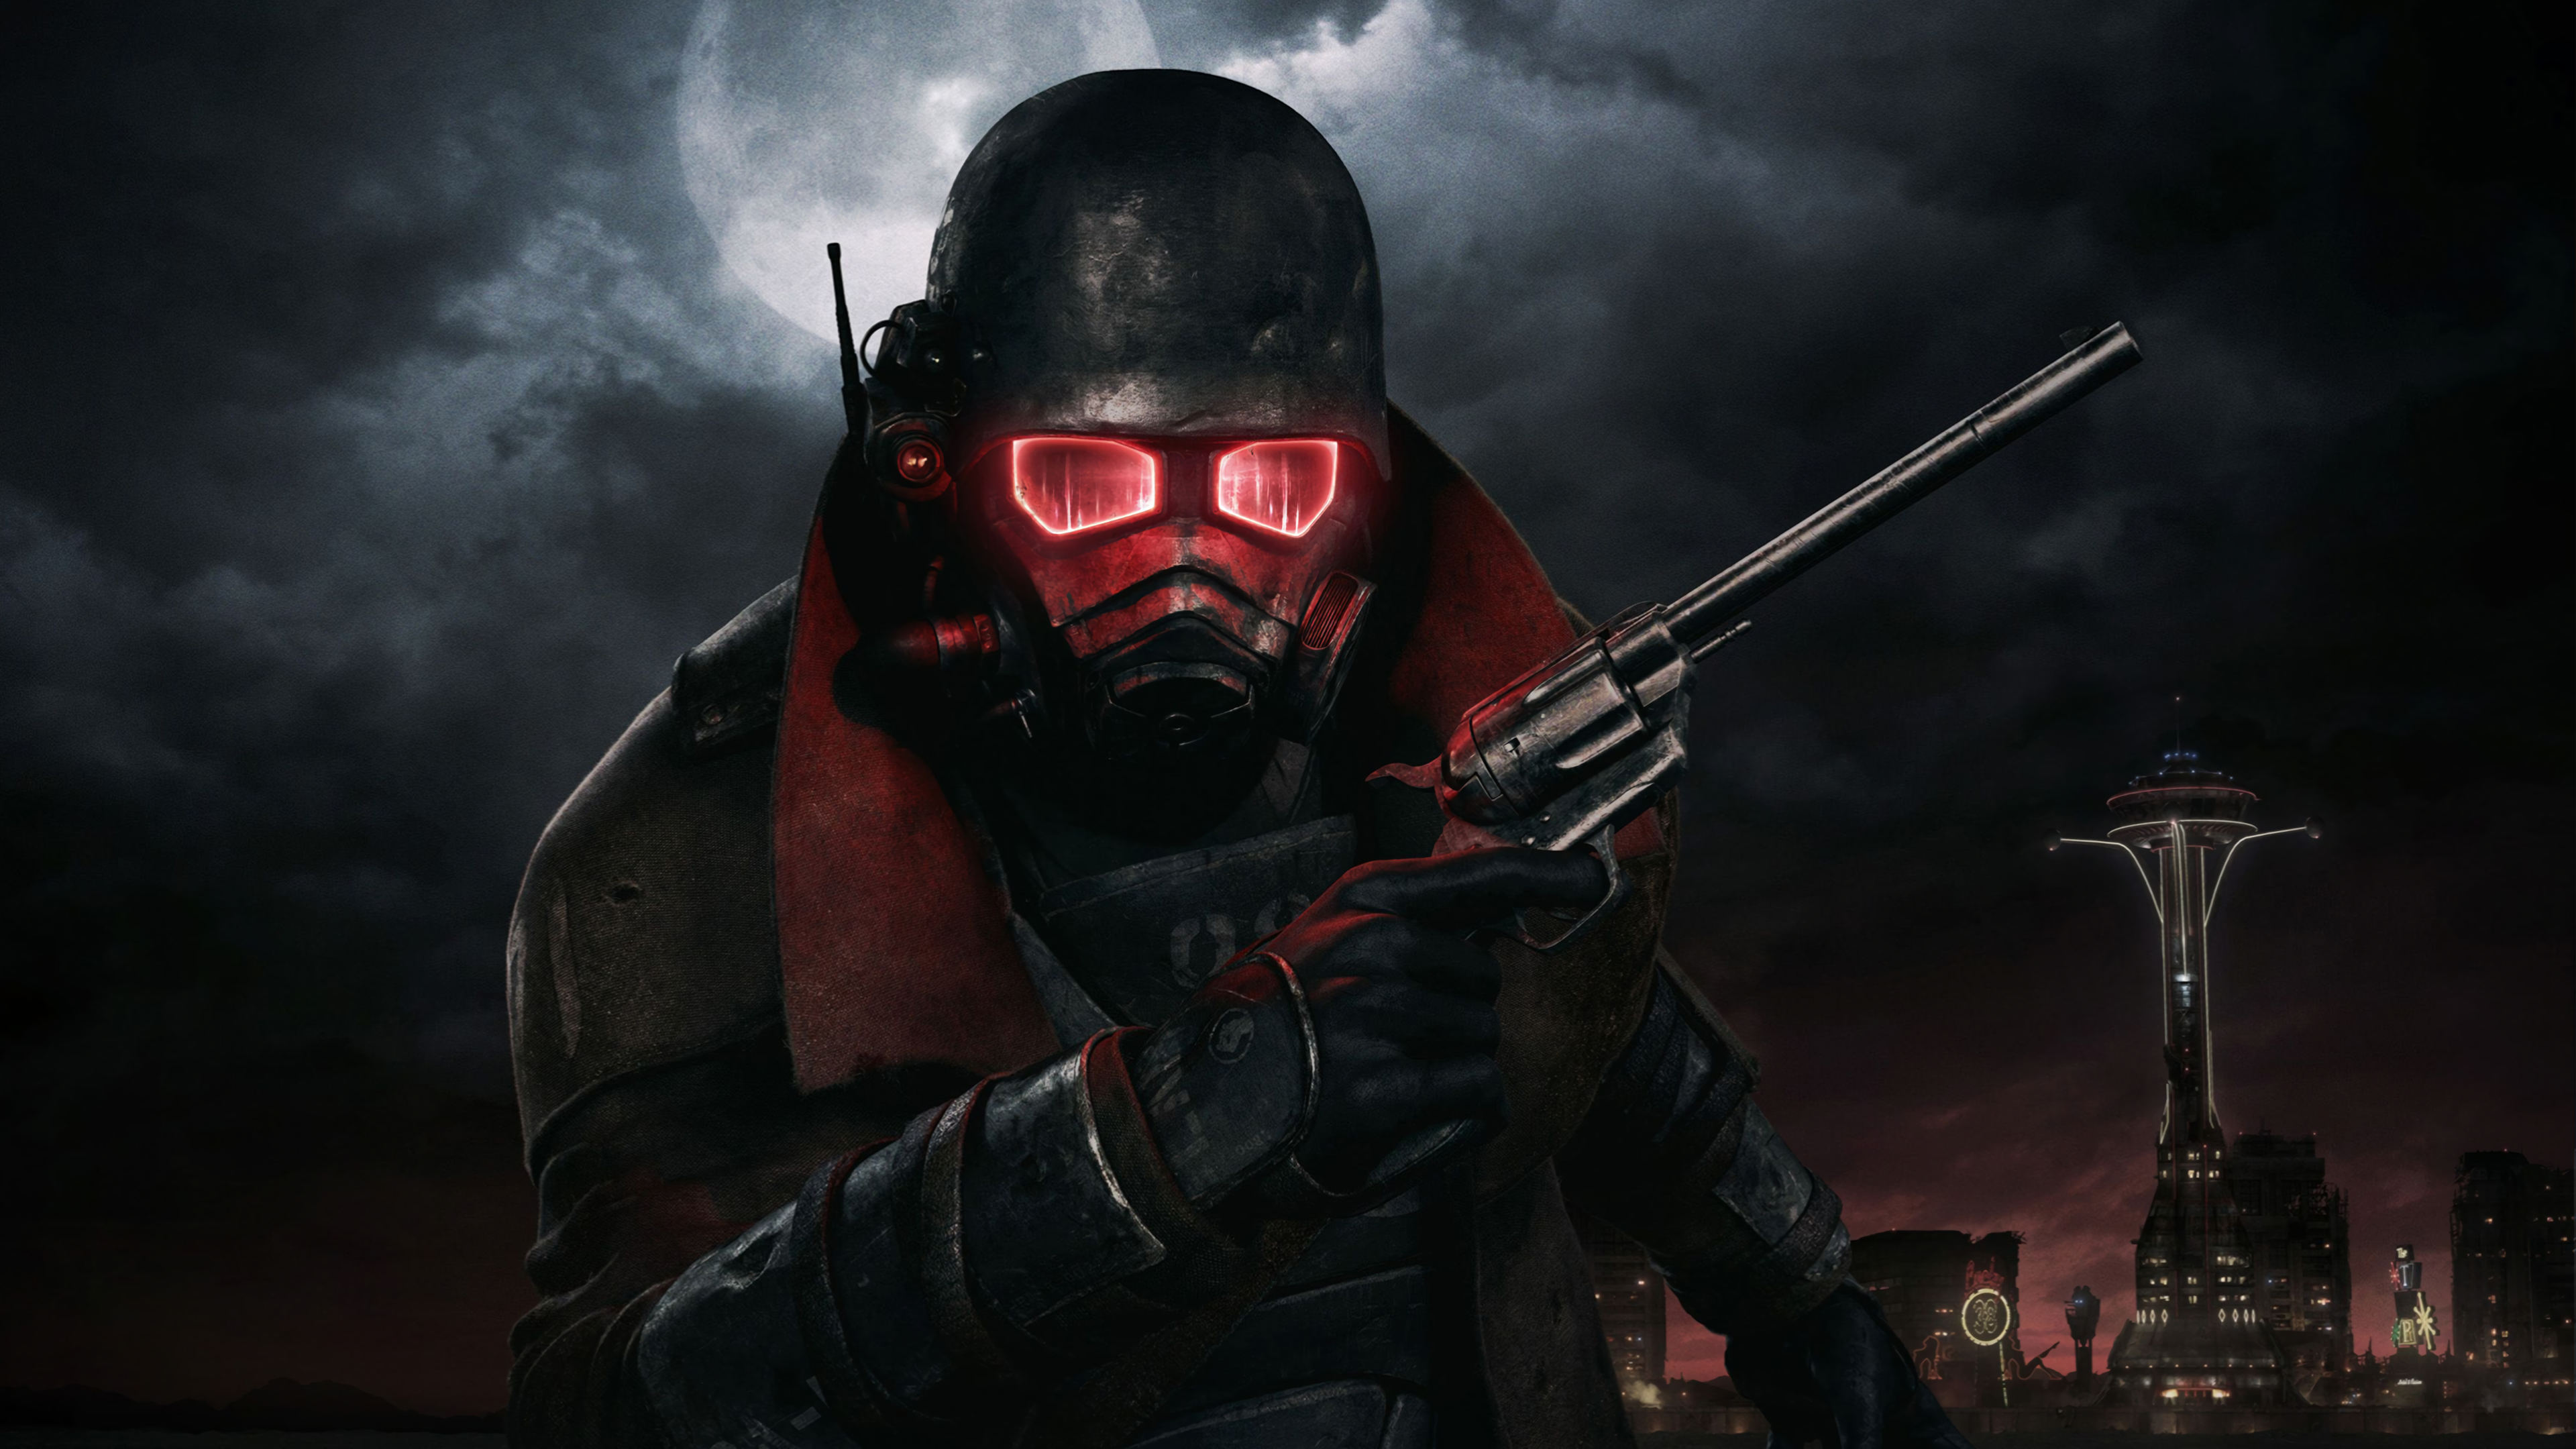 NCR ranger by TheOmegaRidley